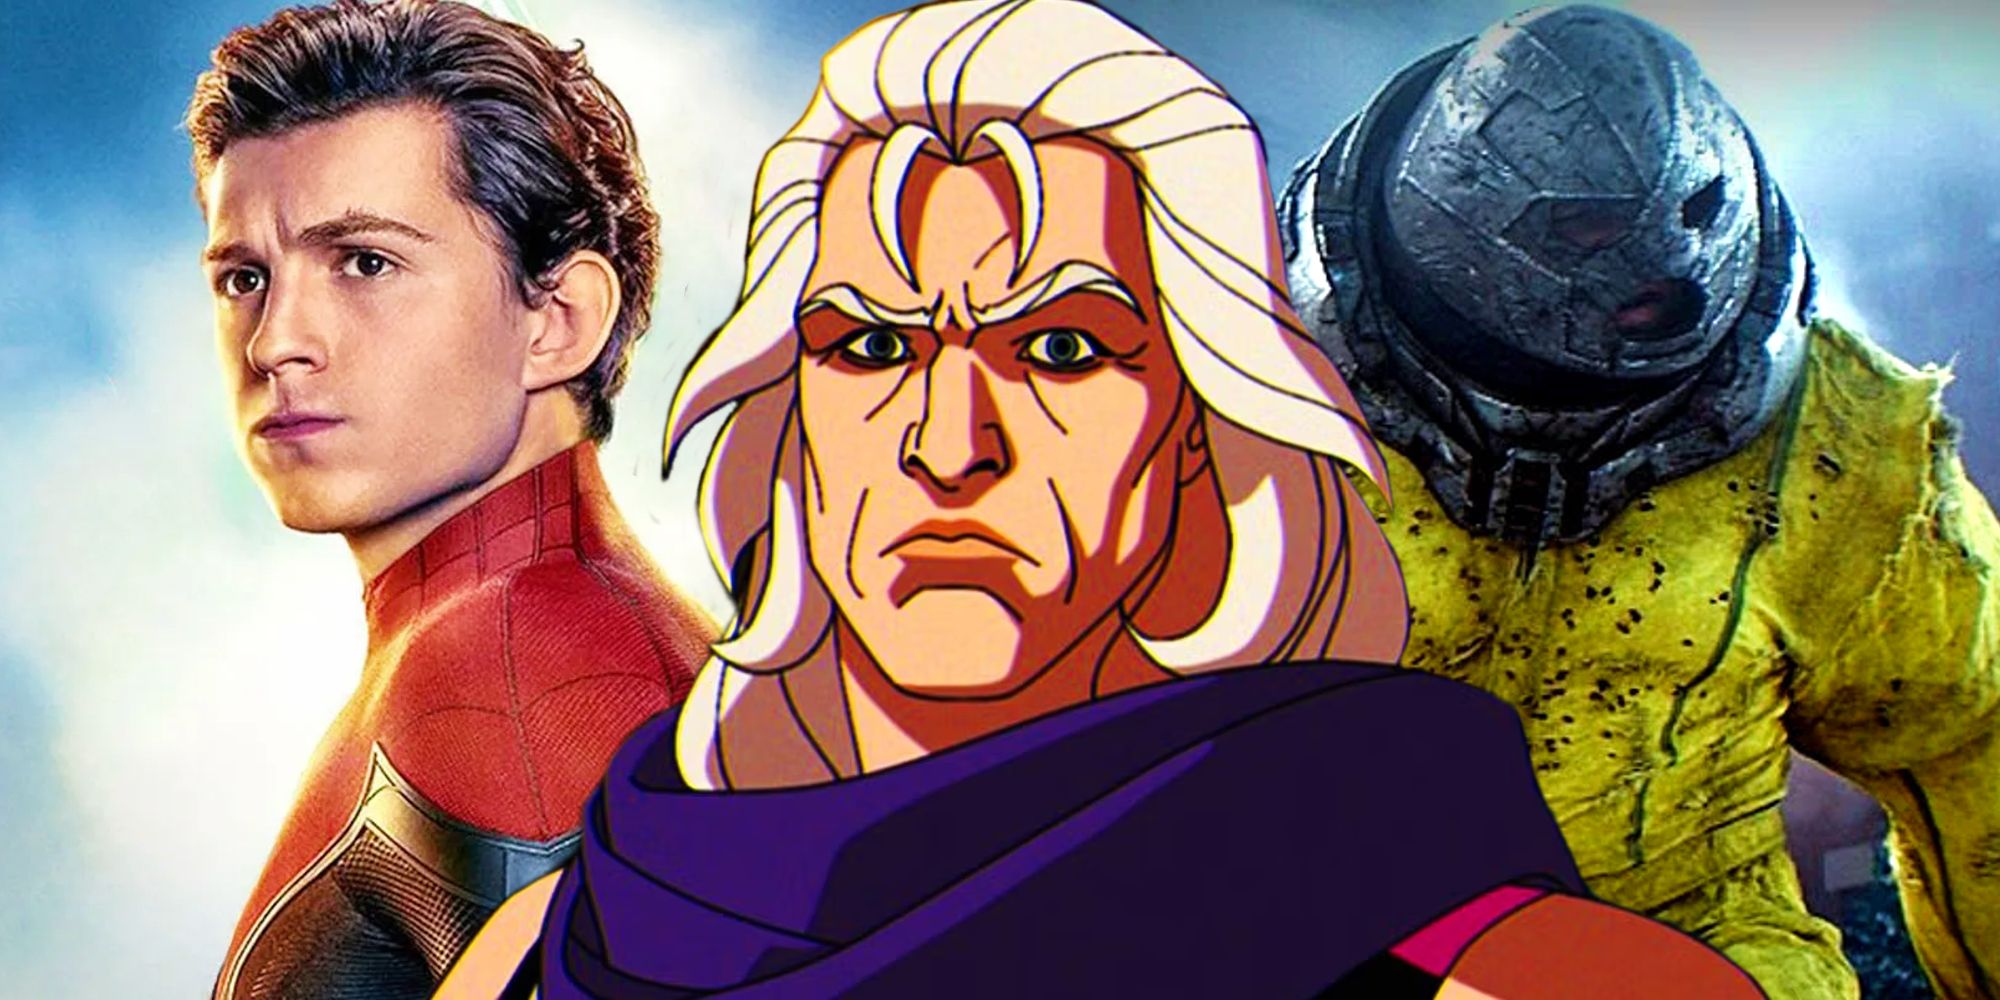 Magneto glaring as seen in X-Men '97 (2024) between Tom Holland as Spider-Man in the poster for Far From Home (2019) and Juggernaut from Deadpool 2 (2018)